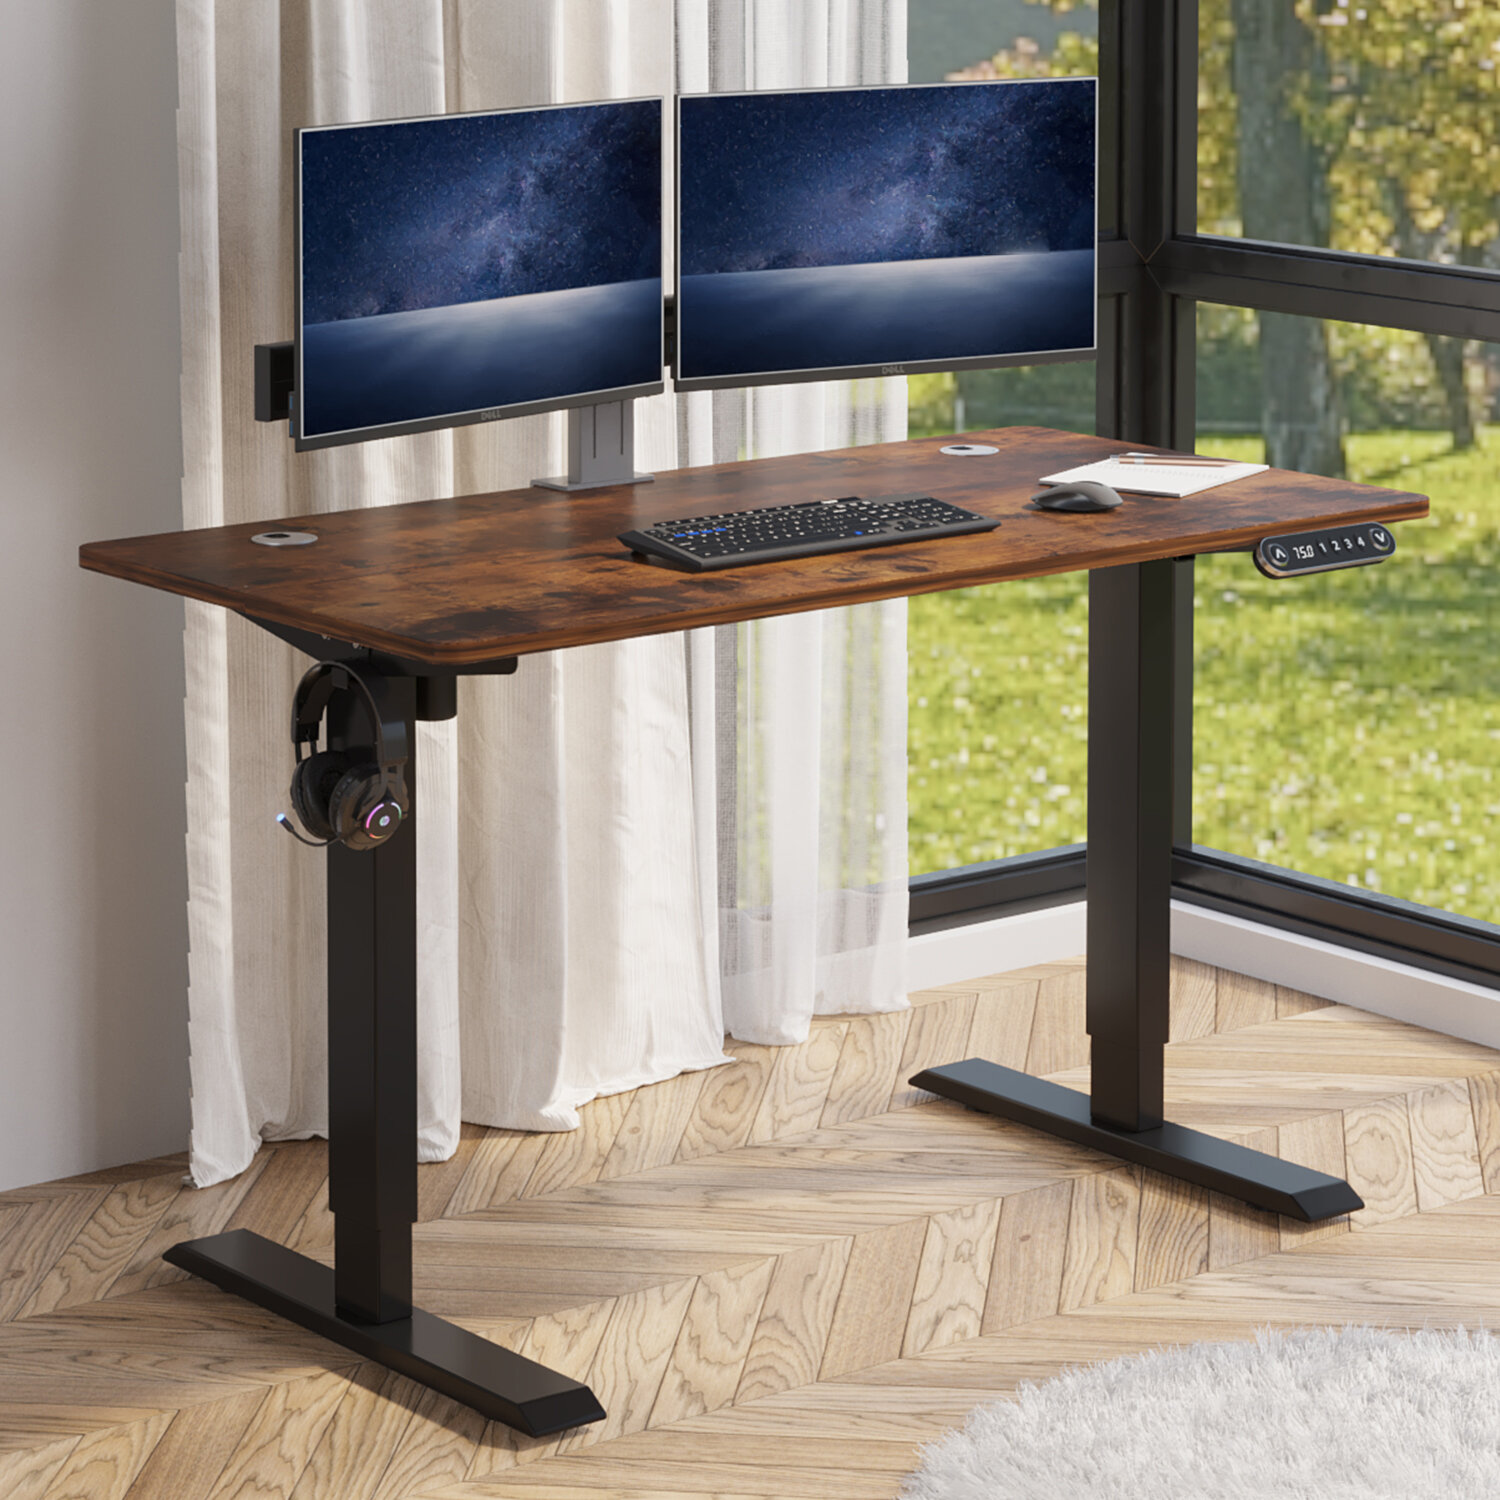 The World's Only Floor Sit to Standing Desk – Uppeal